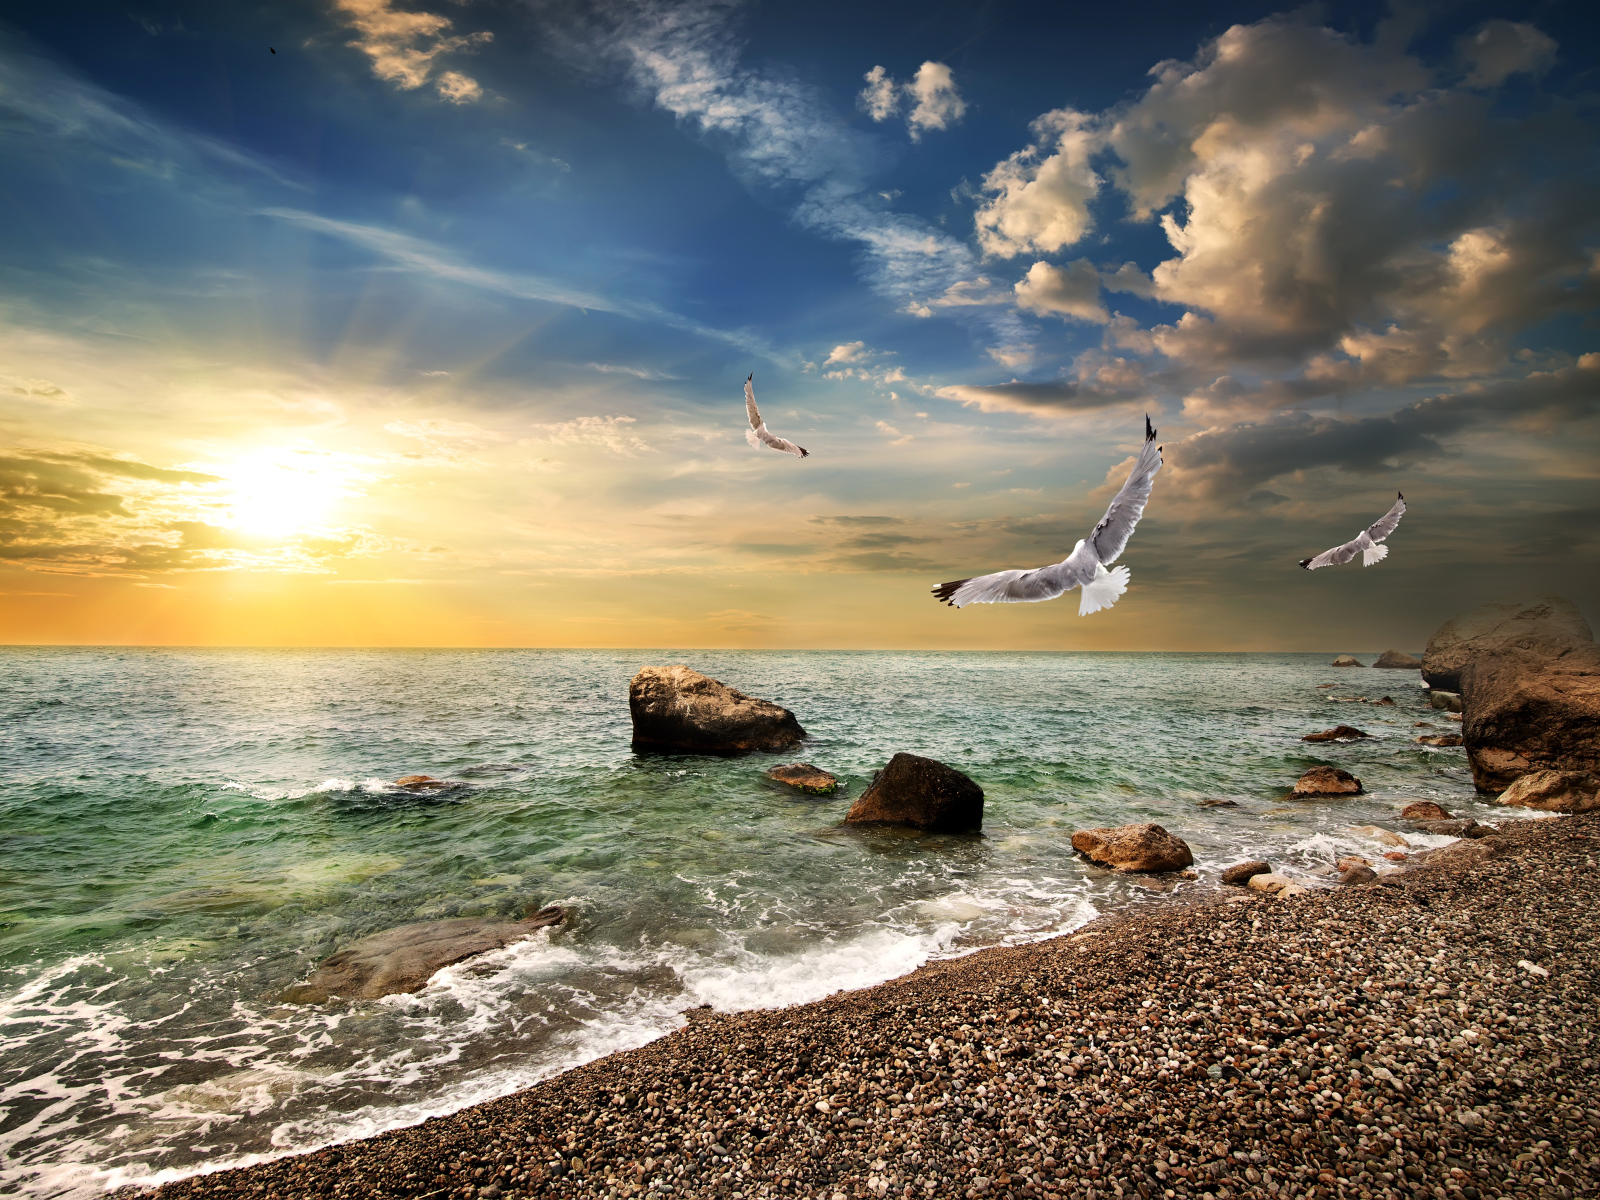 Seagulls fly over the seashore at sunset